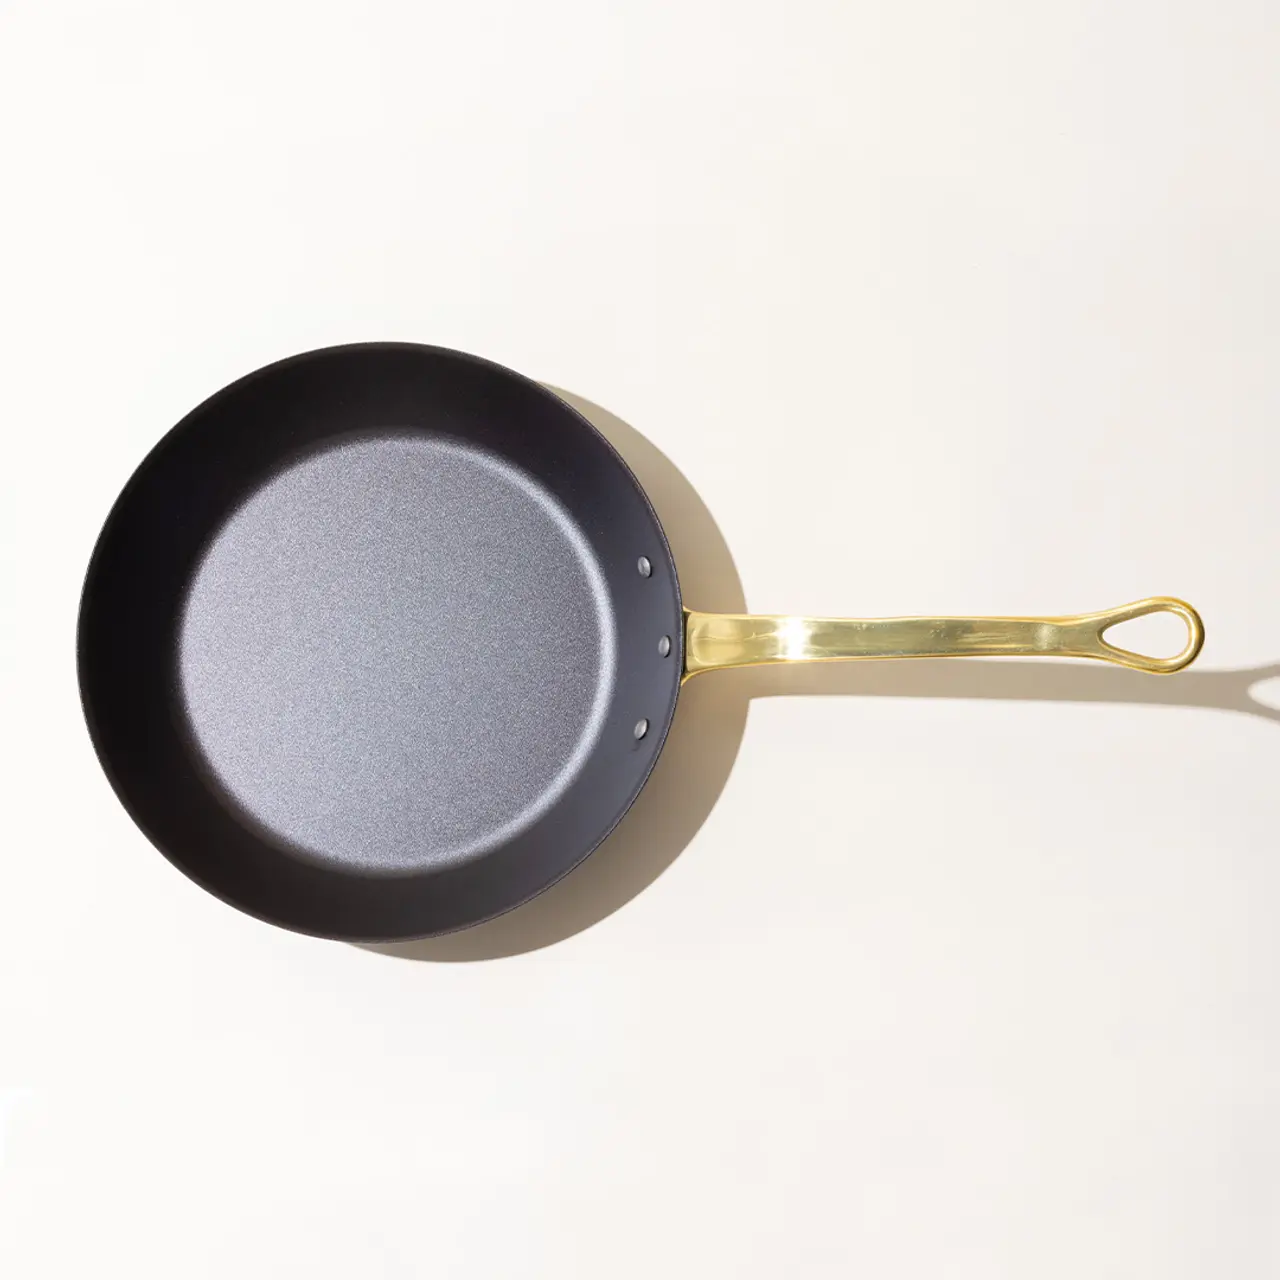 A nonstick frying pan with a gold-colored handle on a plain, light background, casting a slight shadow.